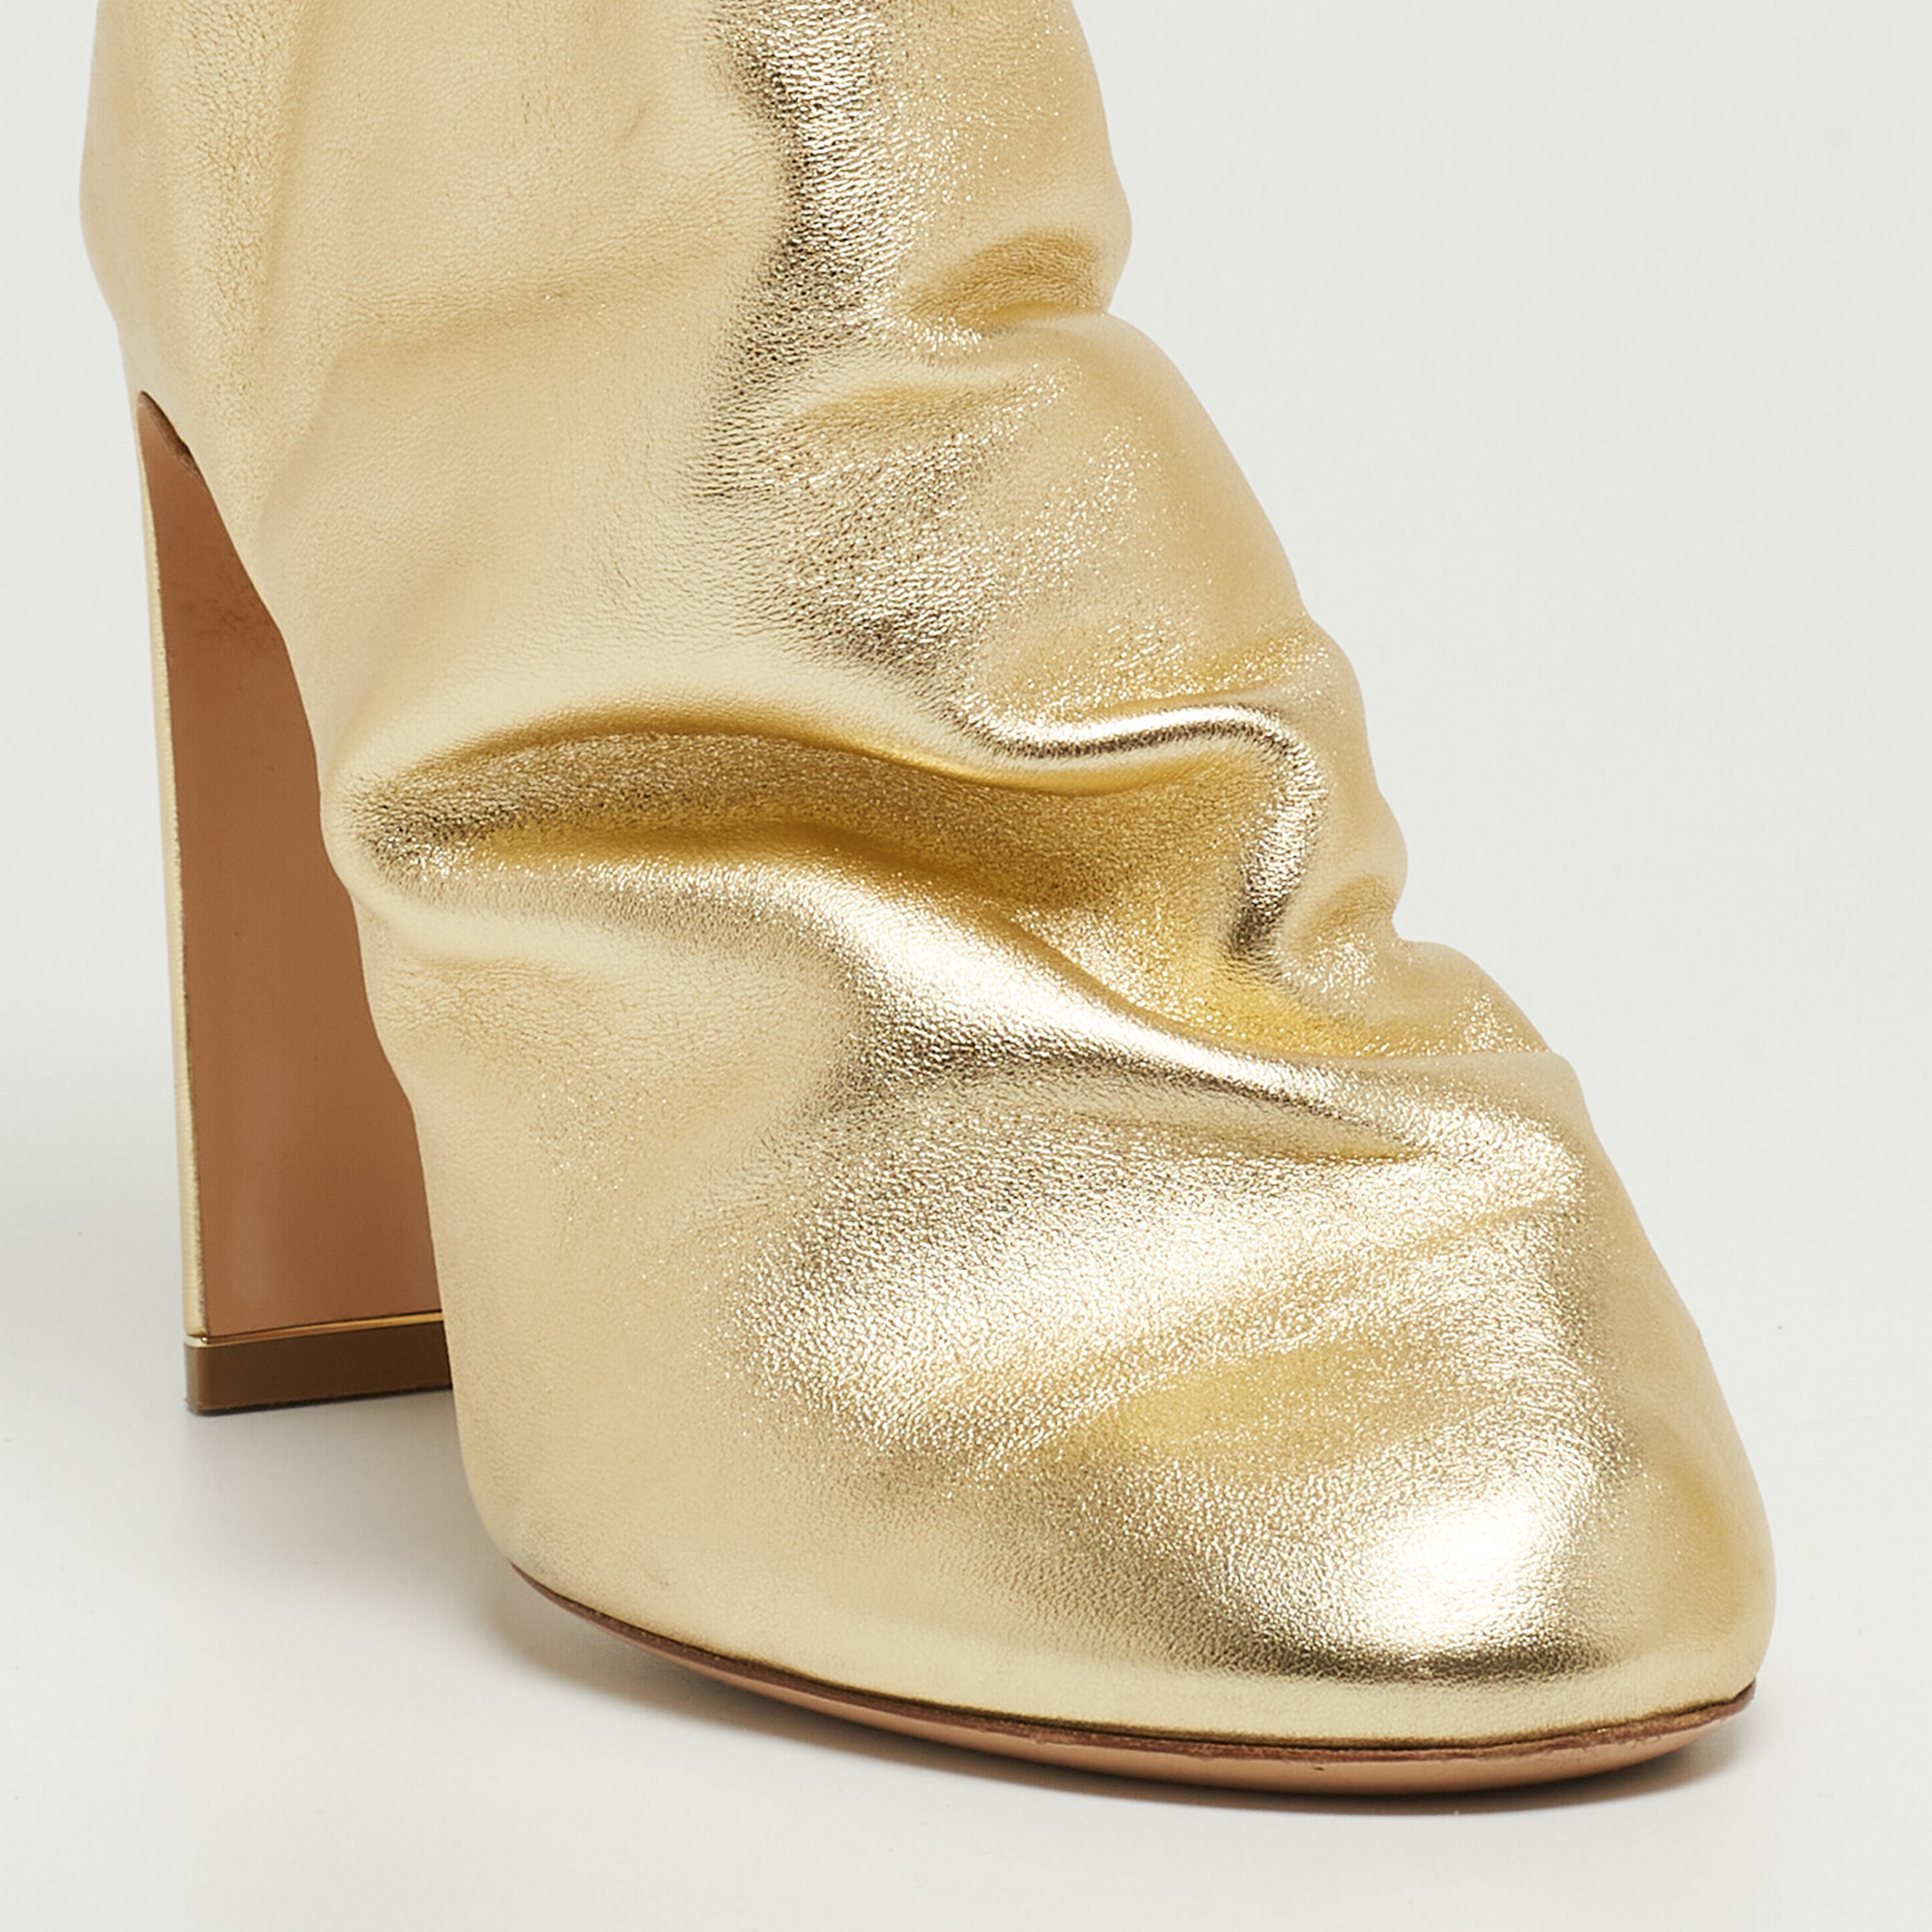 Nicholas Kirkwood Metallic Gold Foil Leather D'arcy Ruched Ankle Booties Size 38.5